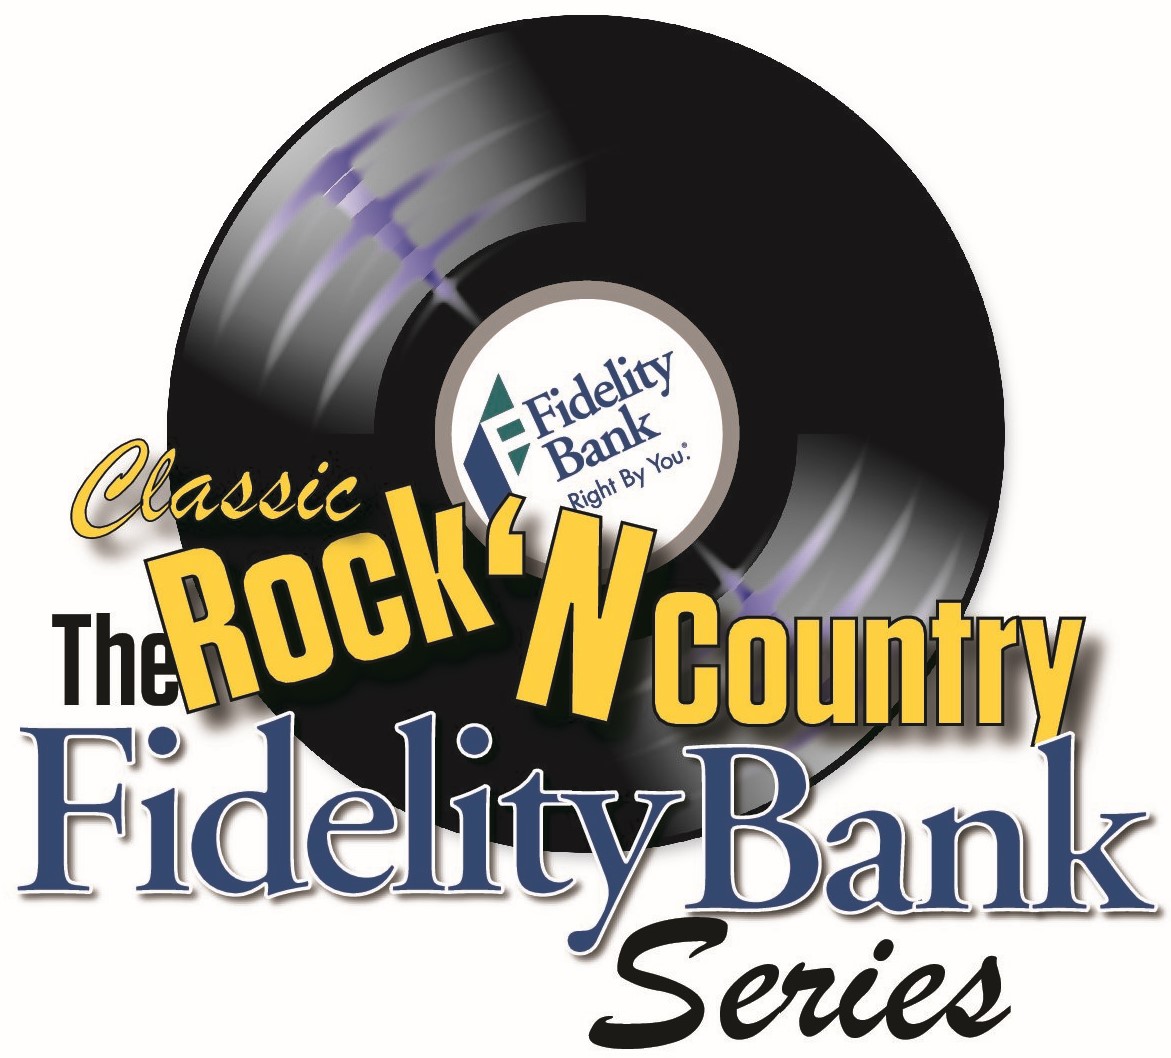 Fidelity Bank's Classic Rock 'N Country Series